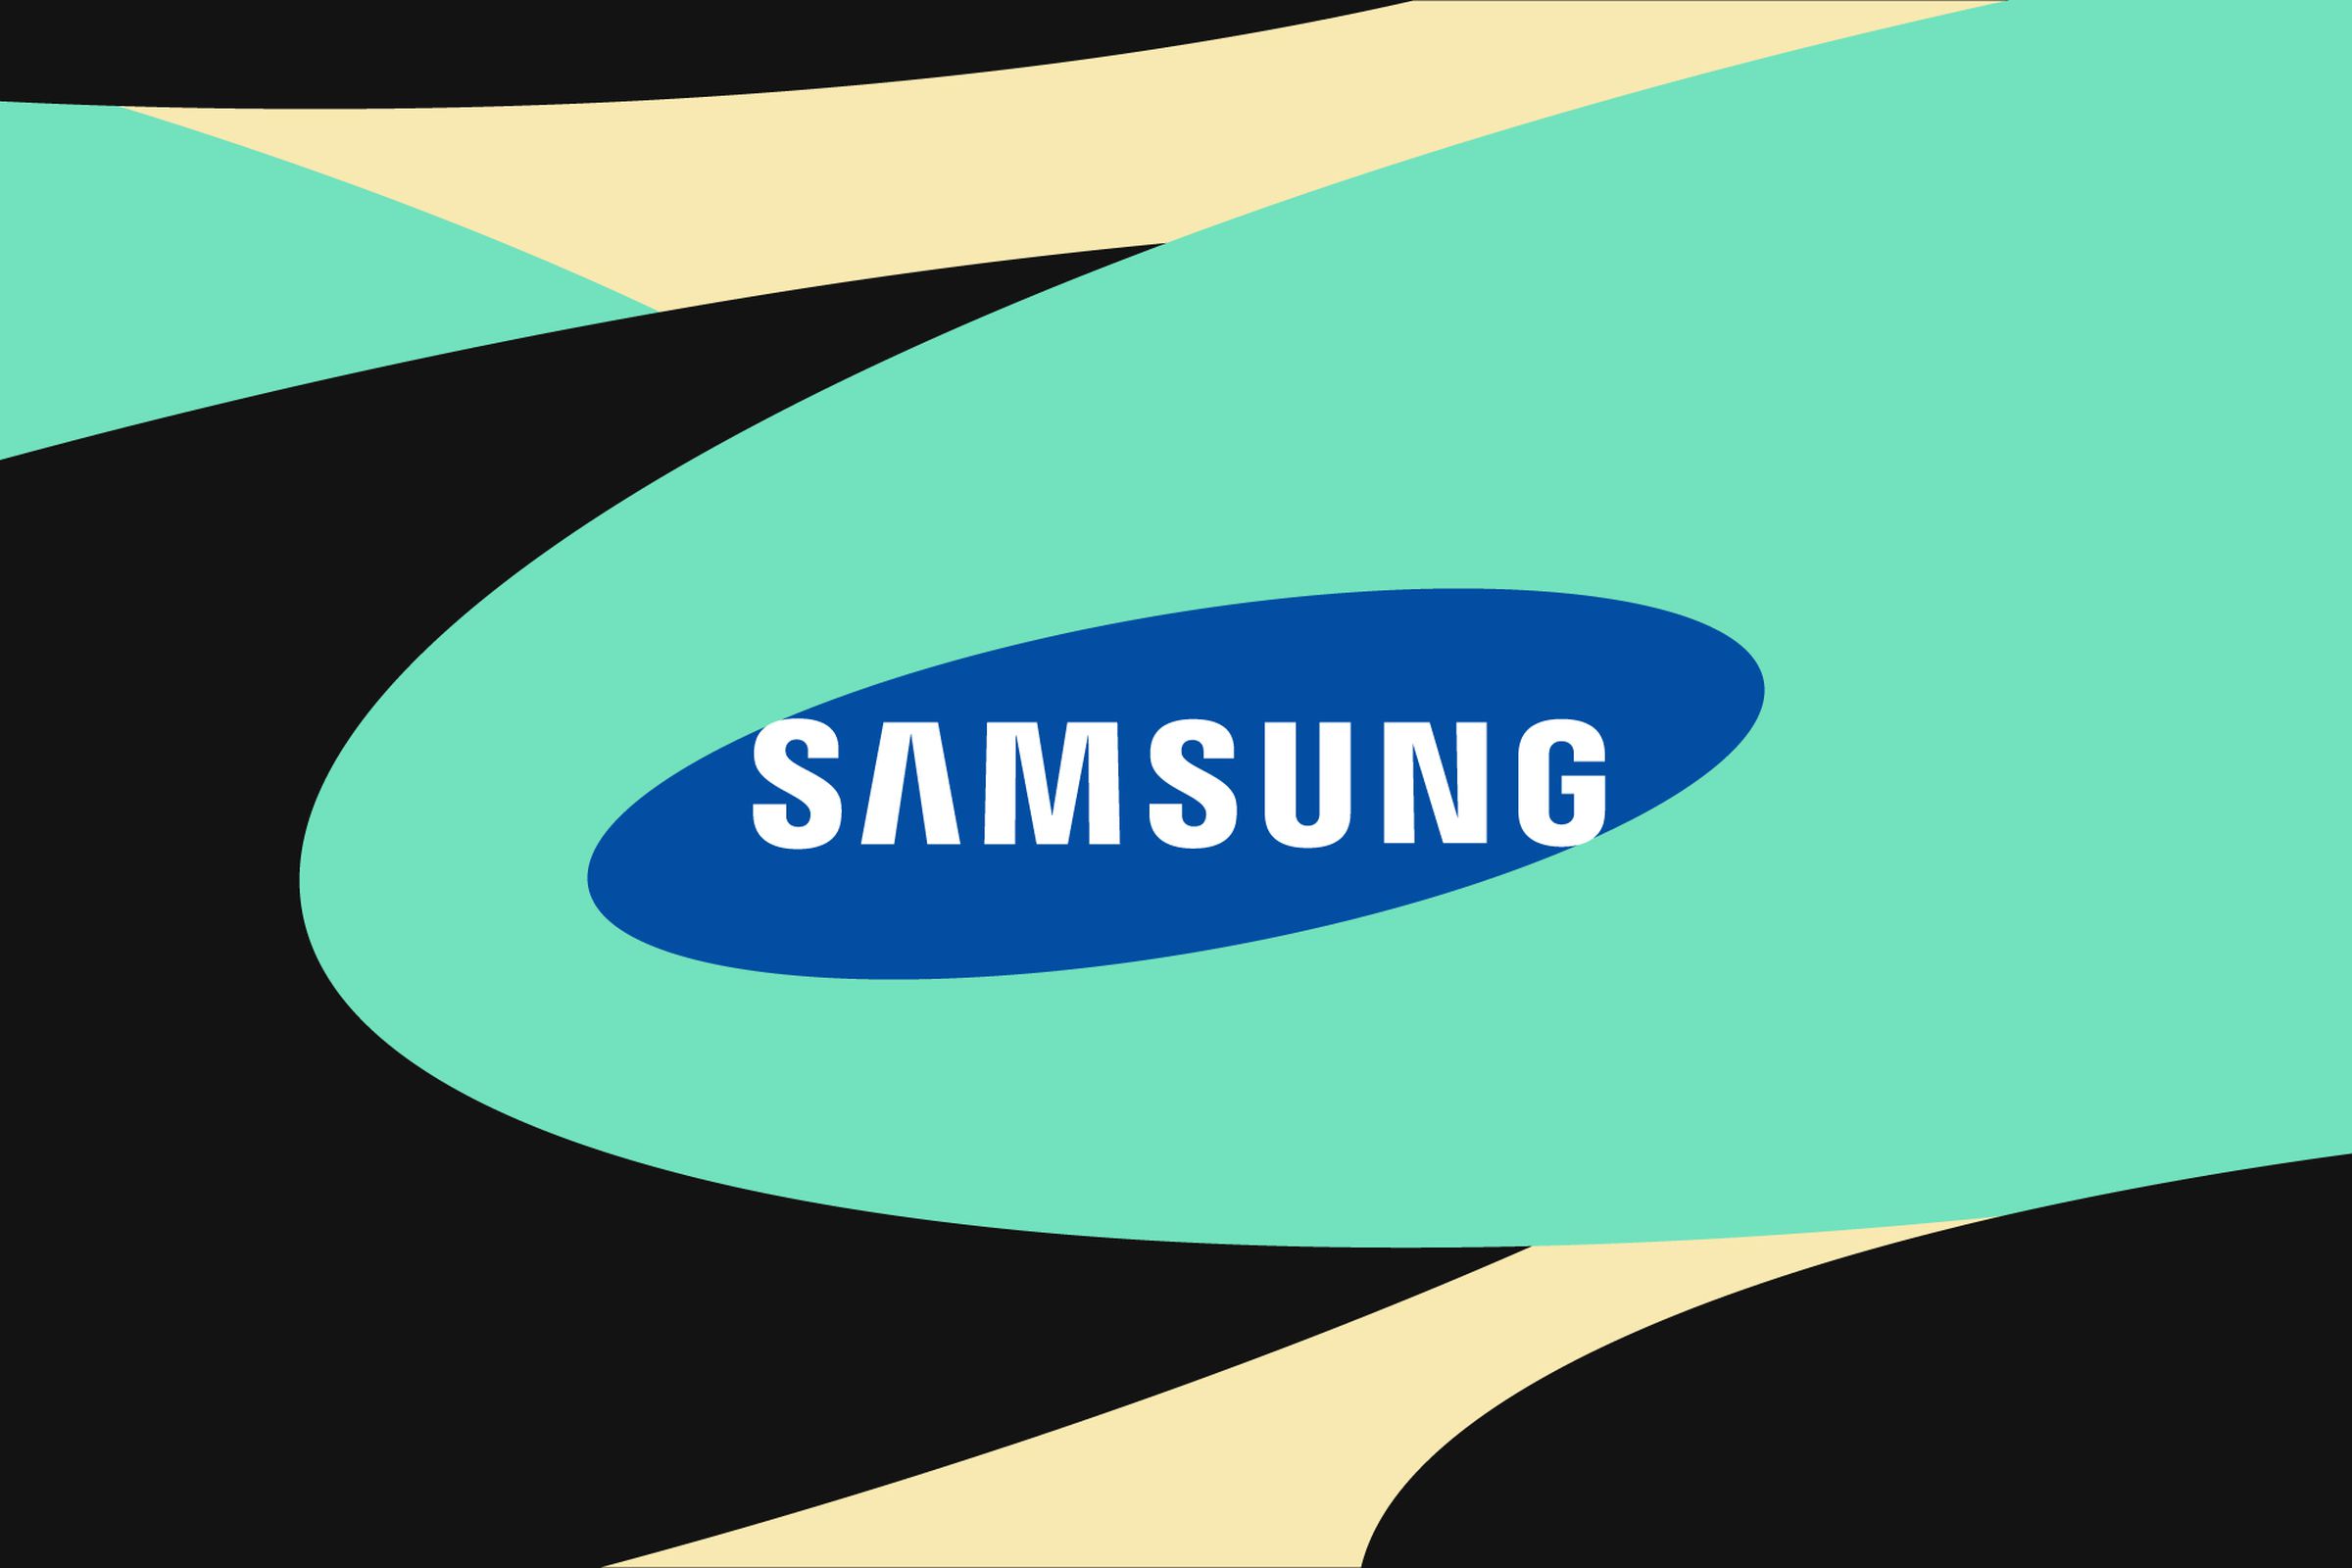 An image showing the Samsung logo on an abstract background